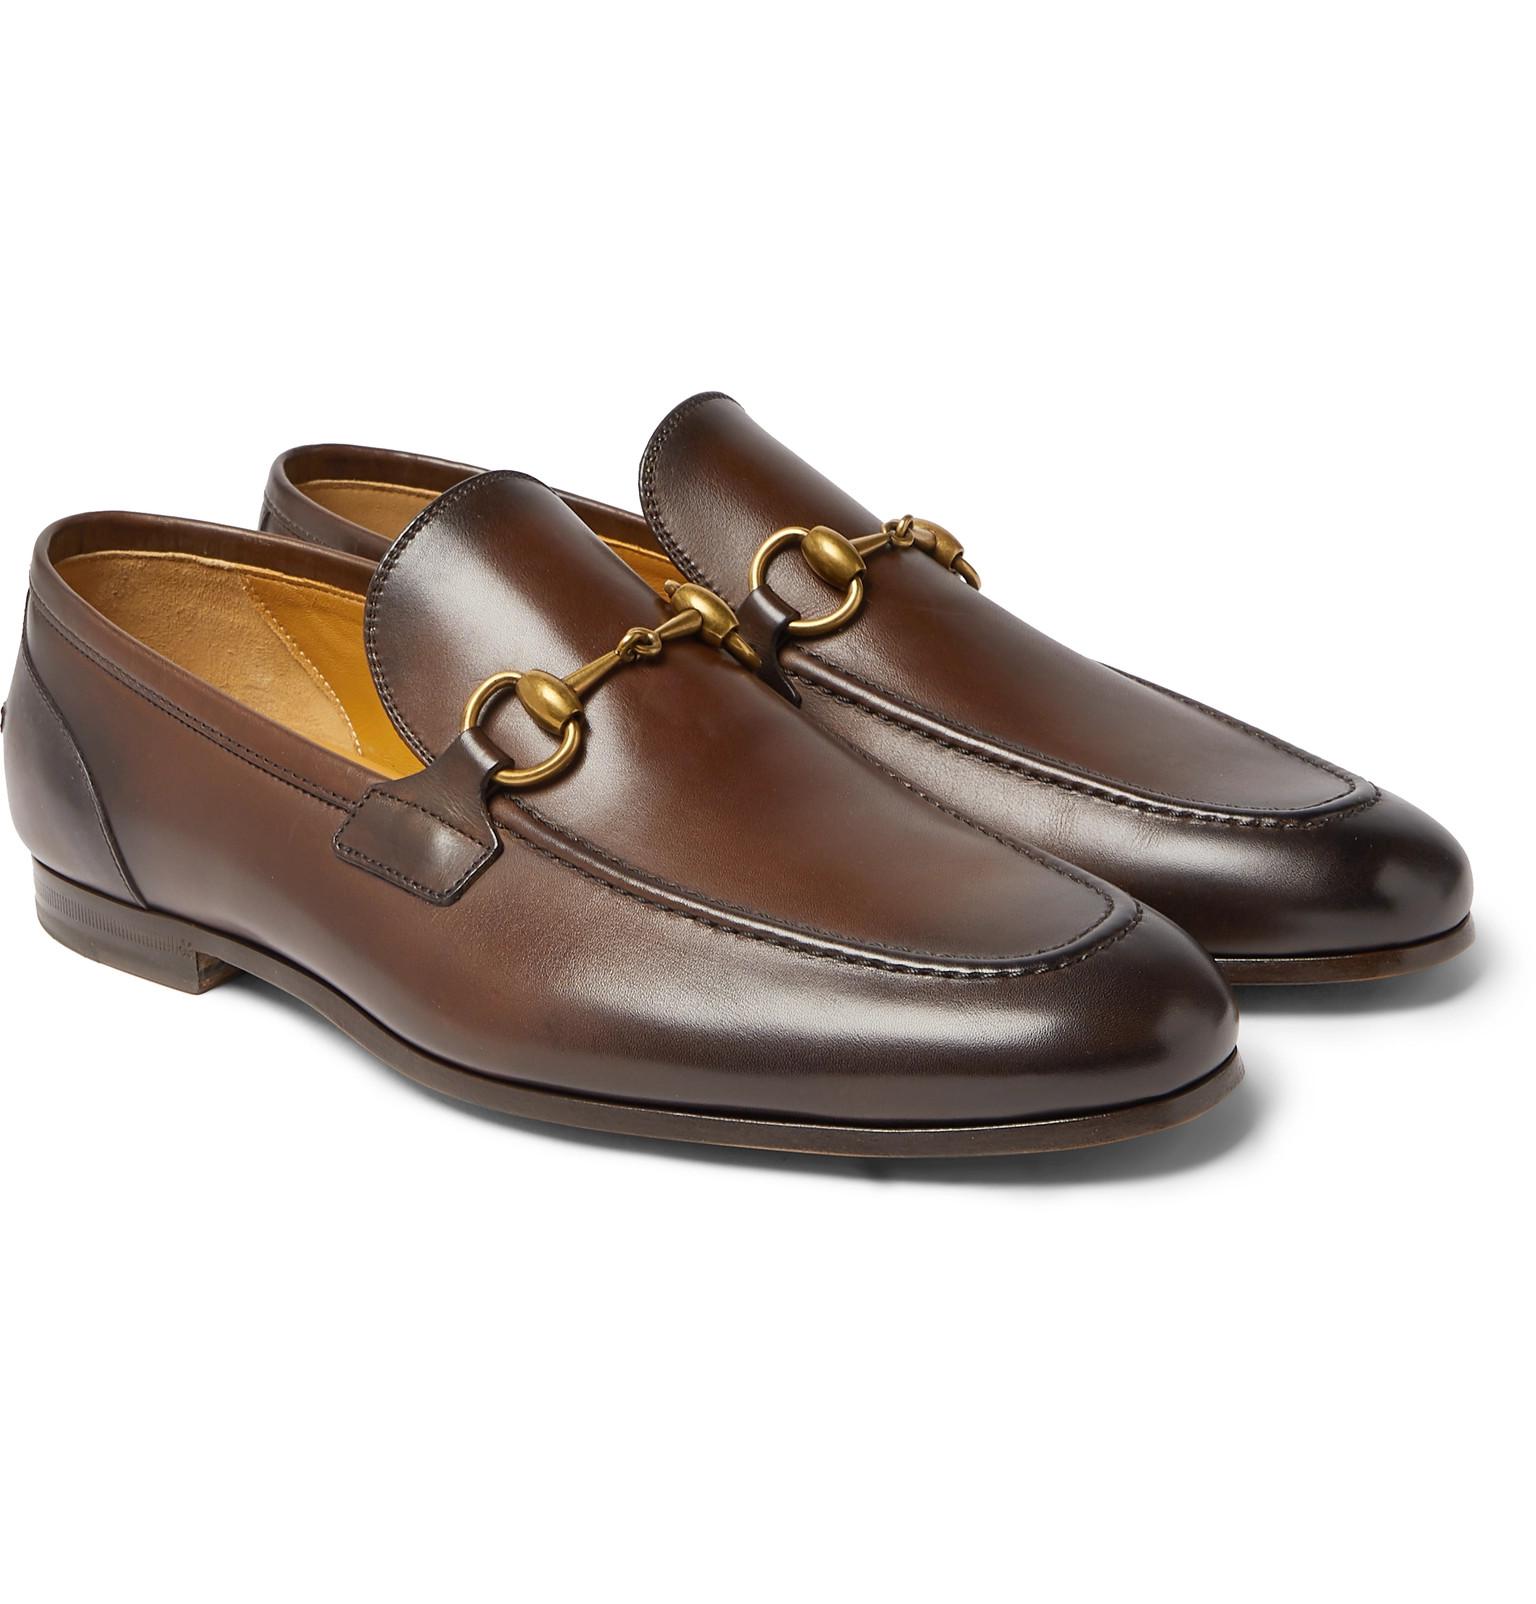 Gucci Jordaan Horsebit Burnished-leather Loafers in Brown for Men - Lyst